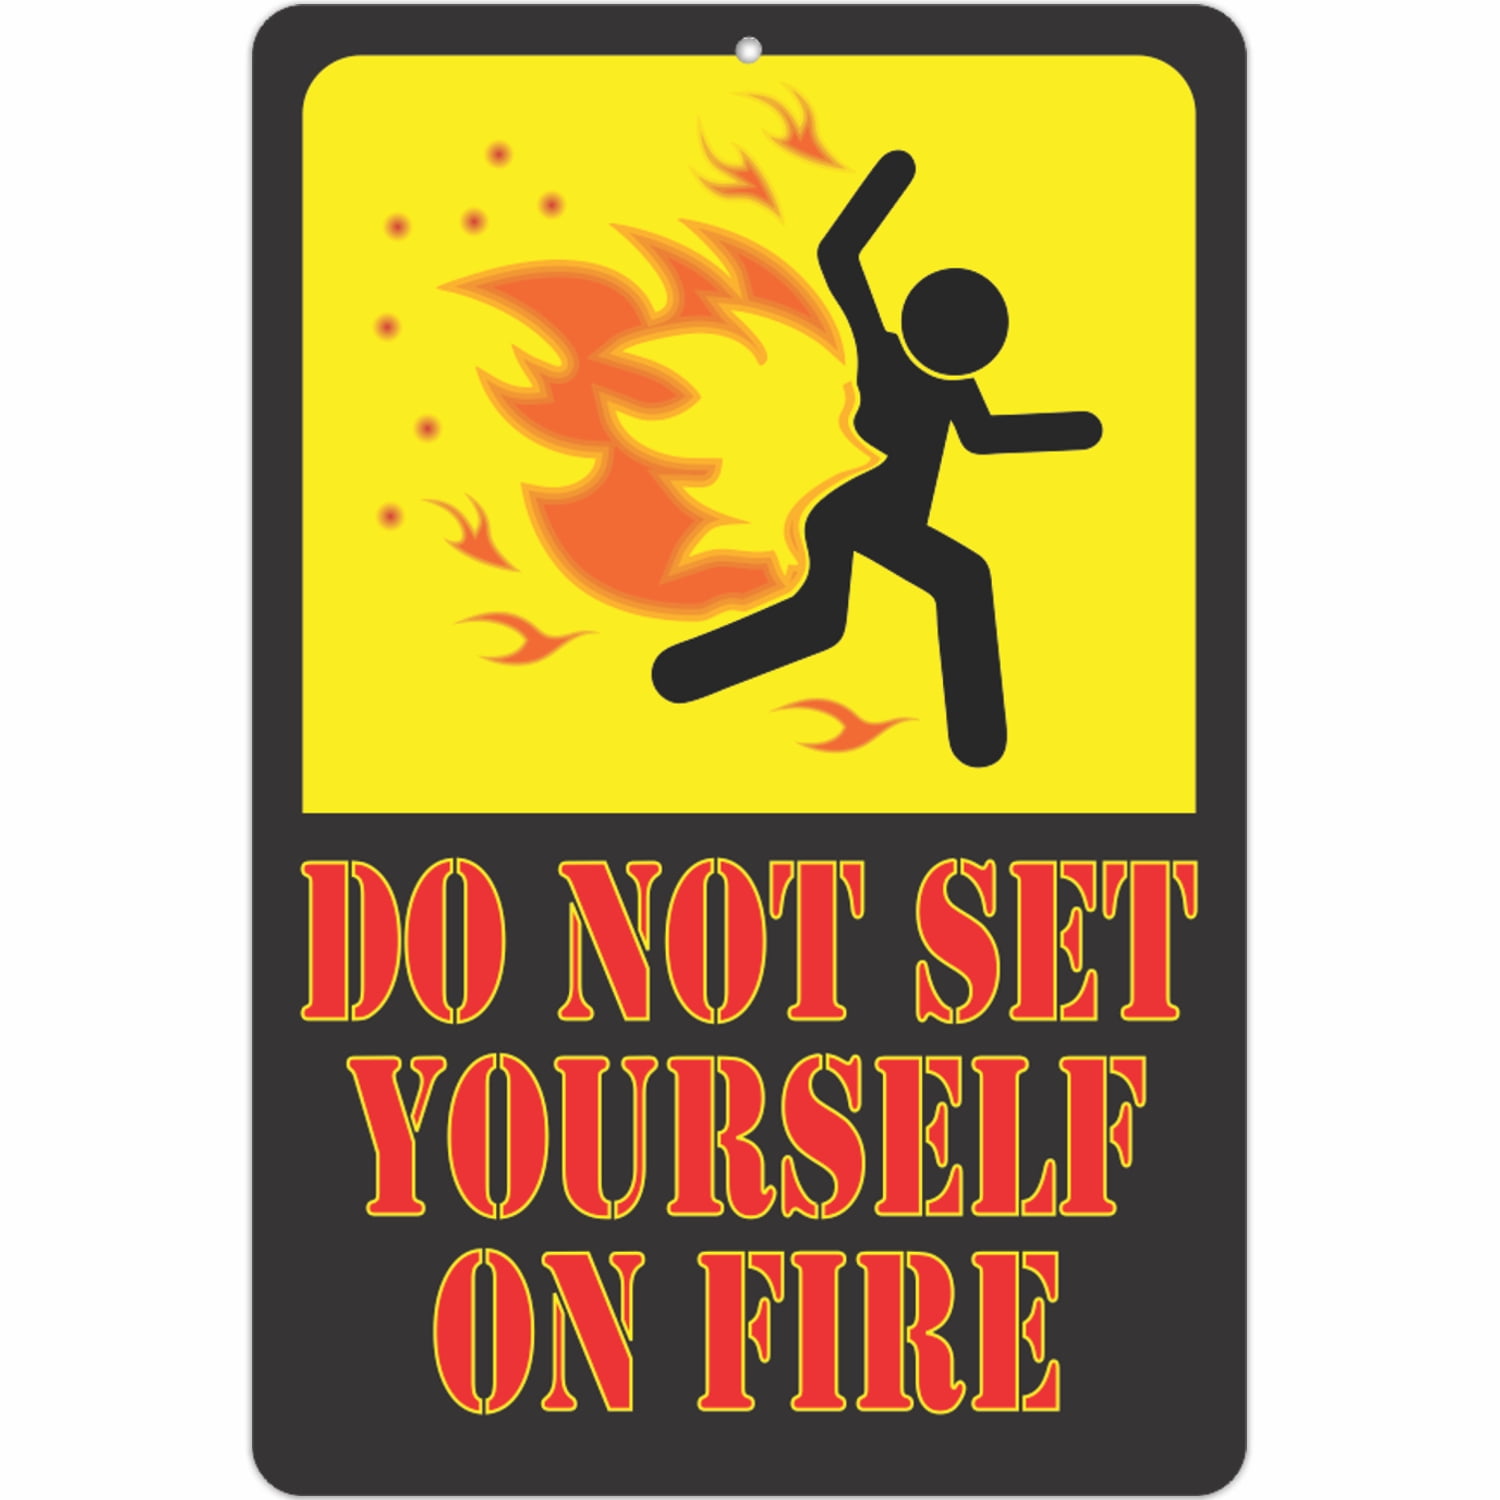 ATX Custom Signs - Funny Warning Sign - Do Not Set Yourself On Fire - Size  8 x 12 